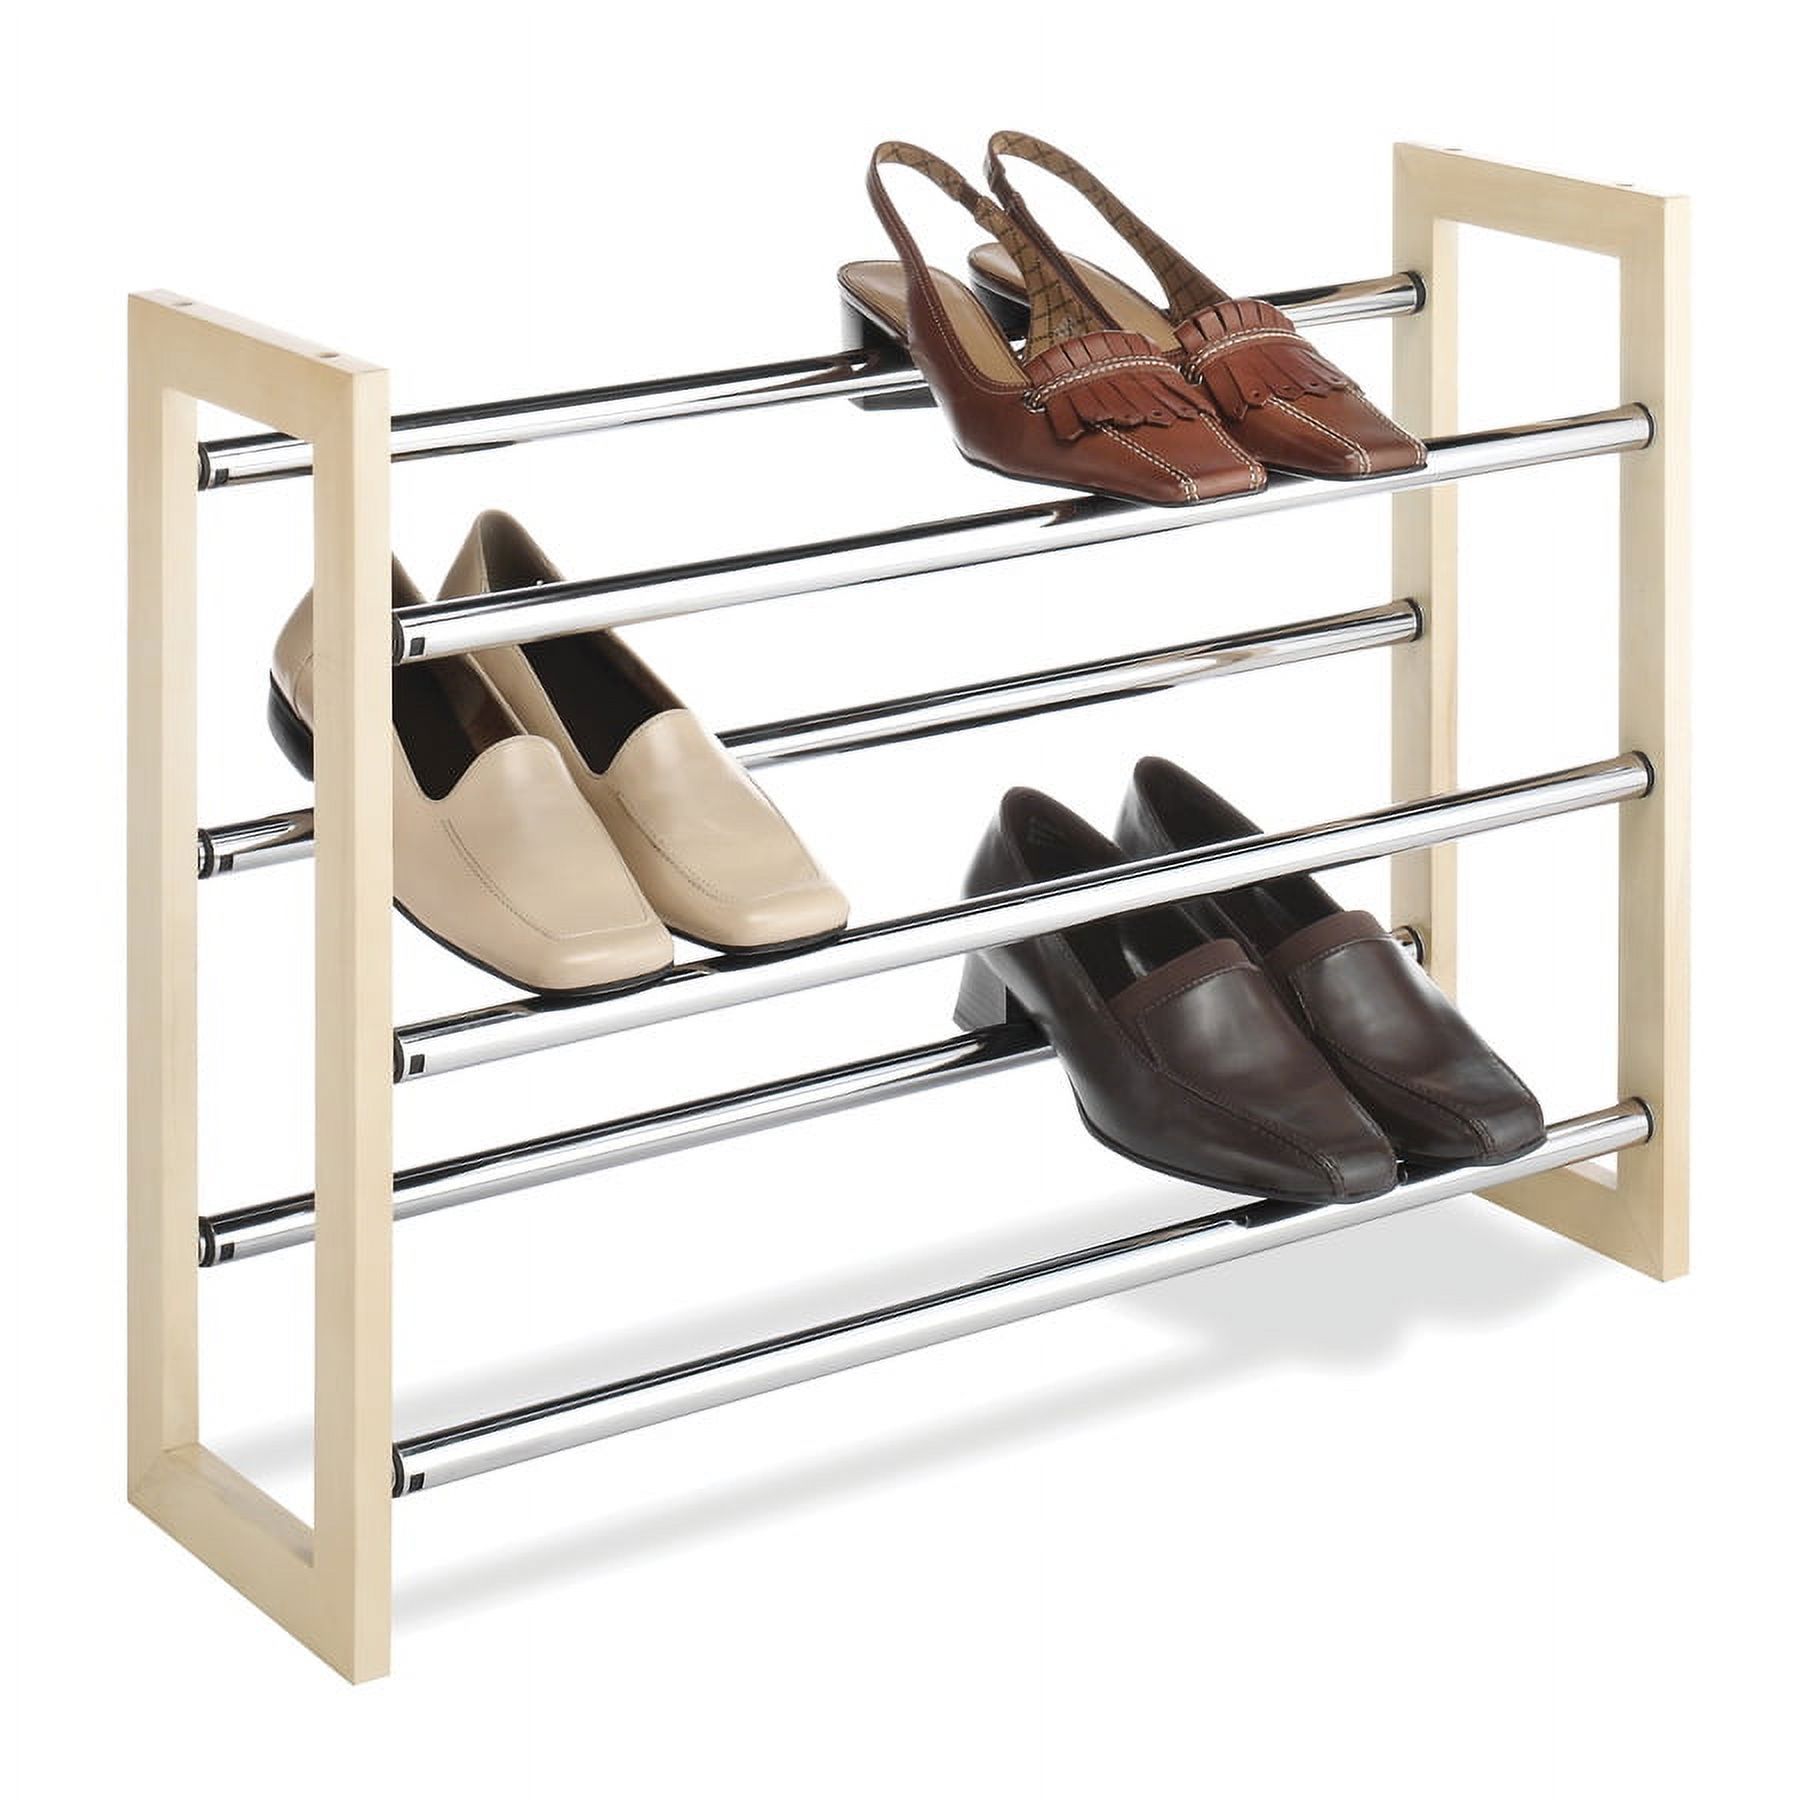 Whitmor 3-Tier Expandable Stackable 18 Pair Shoe Rack, Metal and Wood, Natural Wood and Chrome - Walmart.com